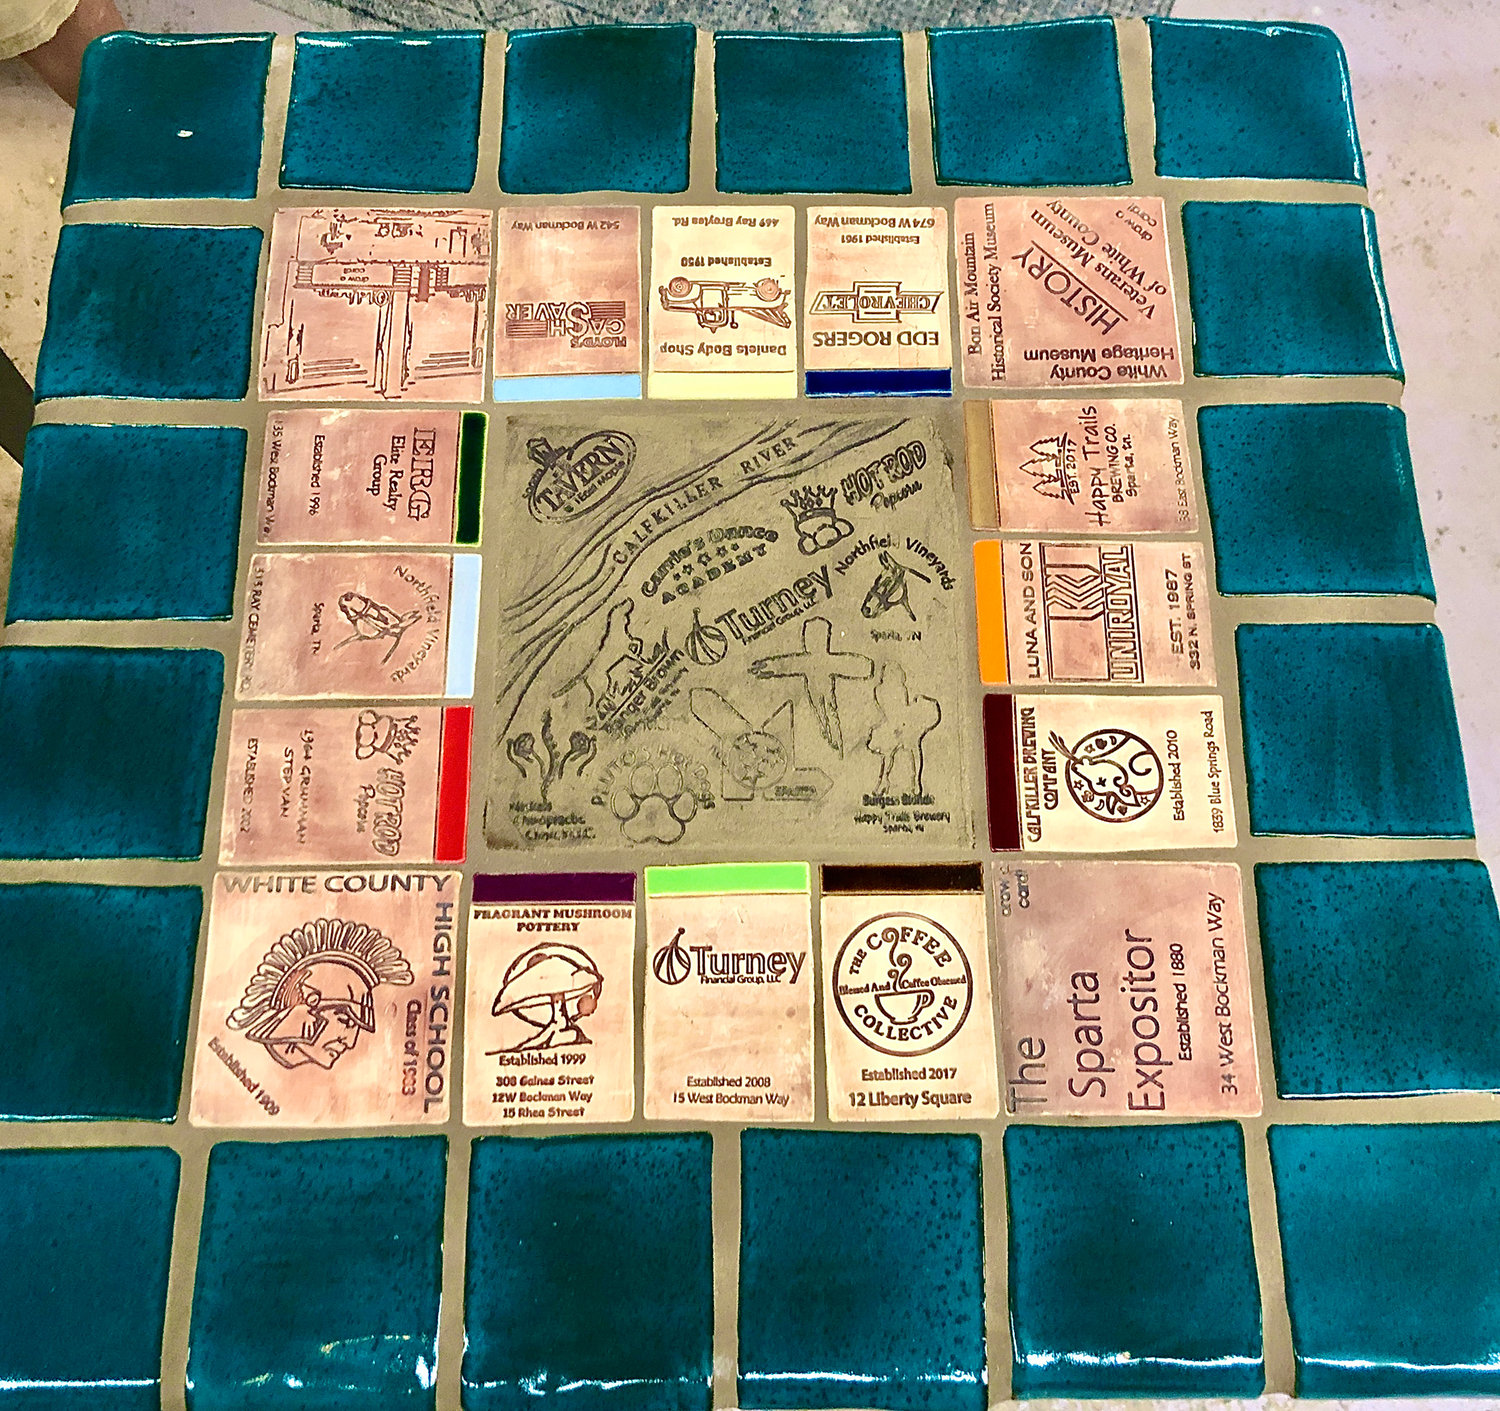 Shown is a preliminary design of a board game designed by Thor McNeil.